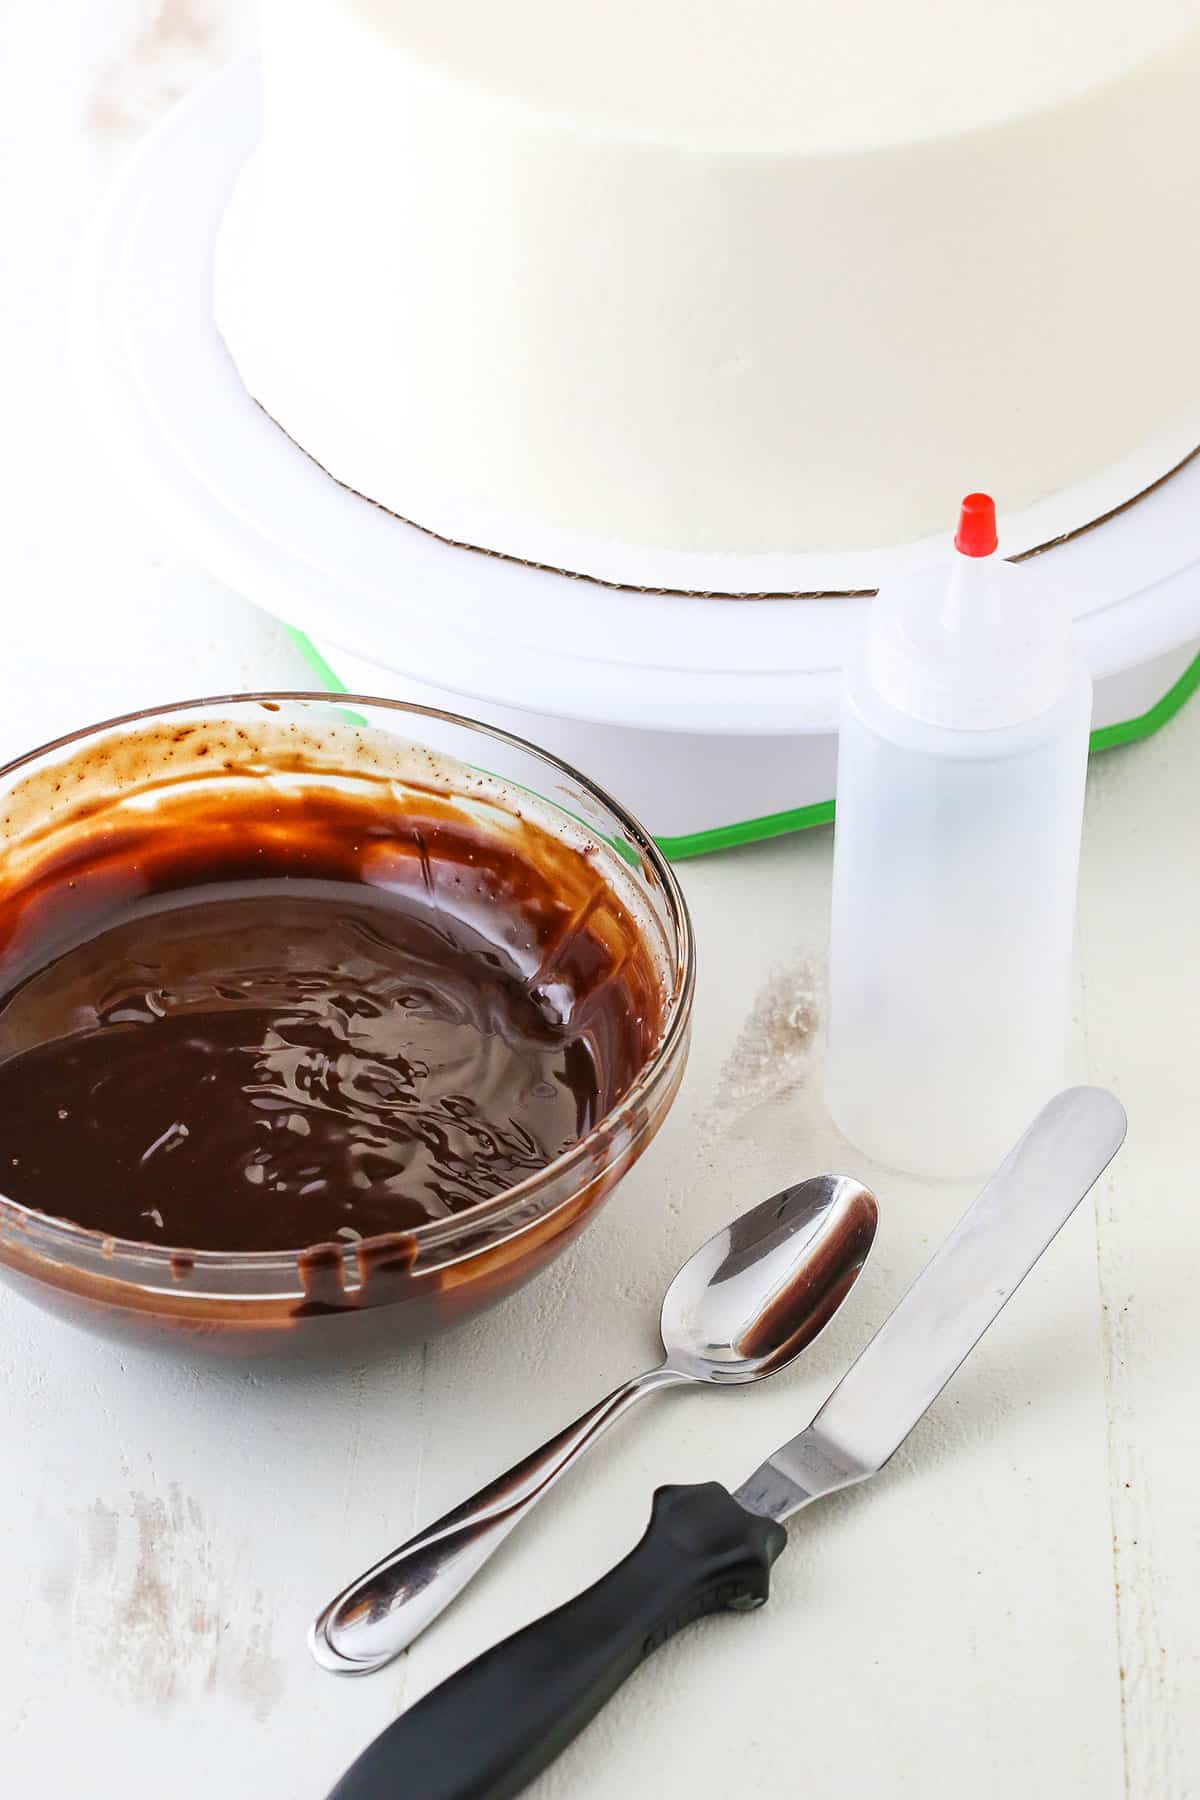 Tools needed for the How to Make a Chocolate Drip Cake tutorial